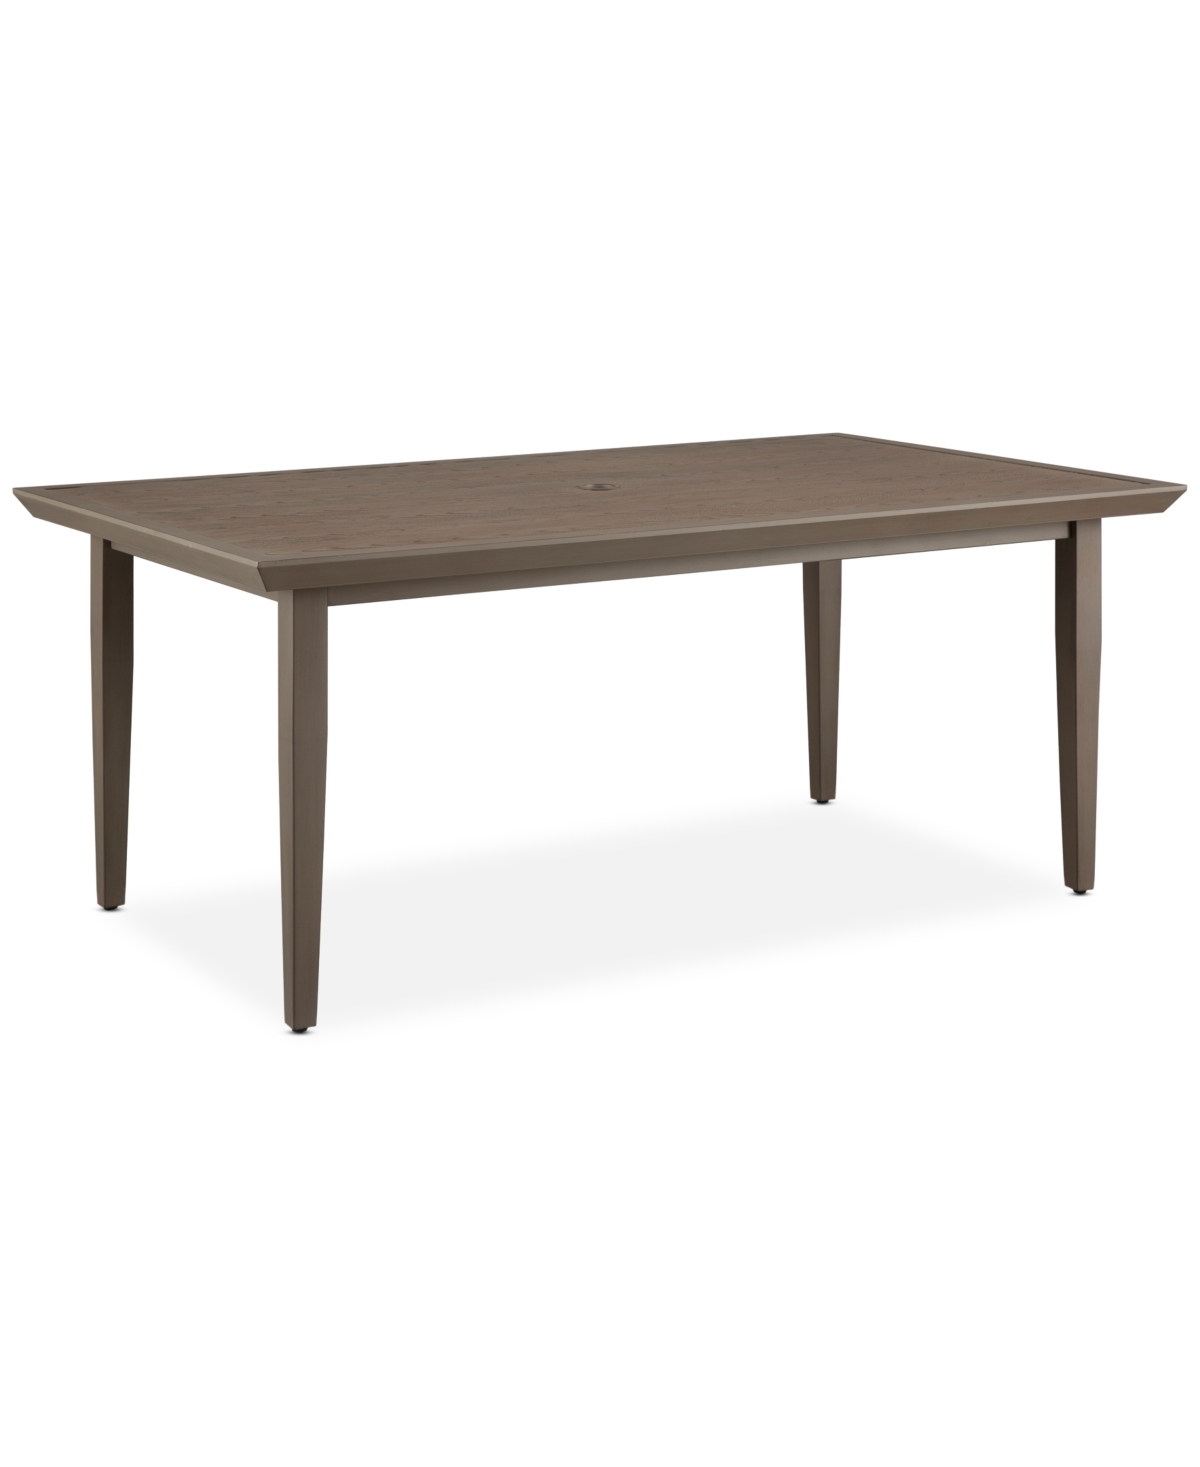 Drew & Jonathan Home Skyview 72" X 42" Outdoor Dining Table